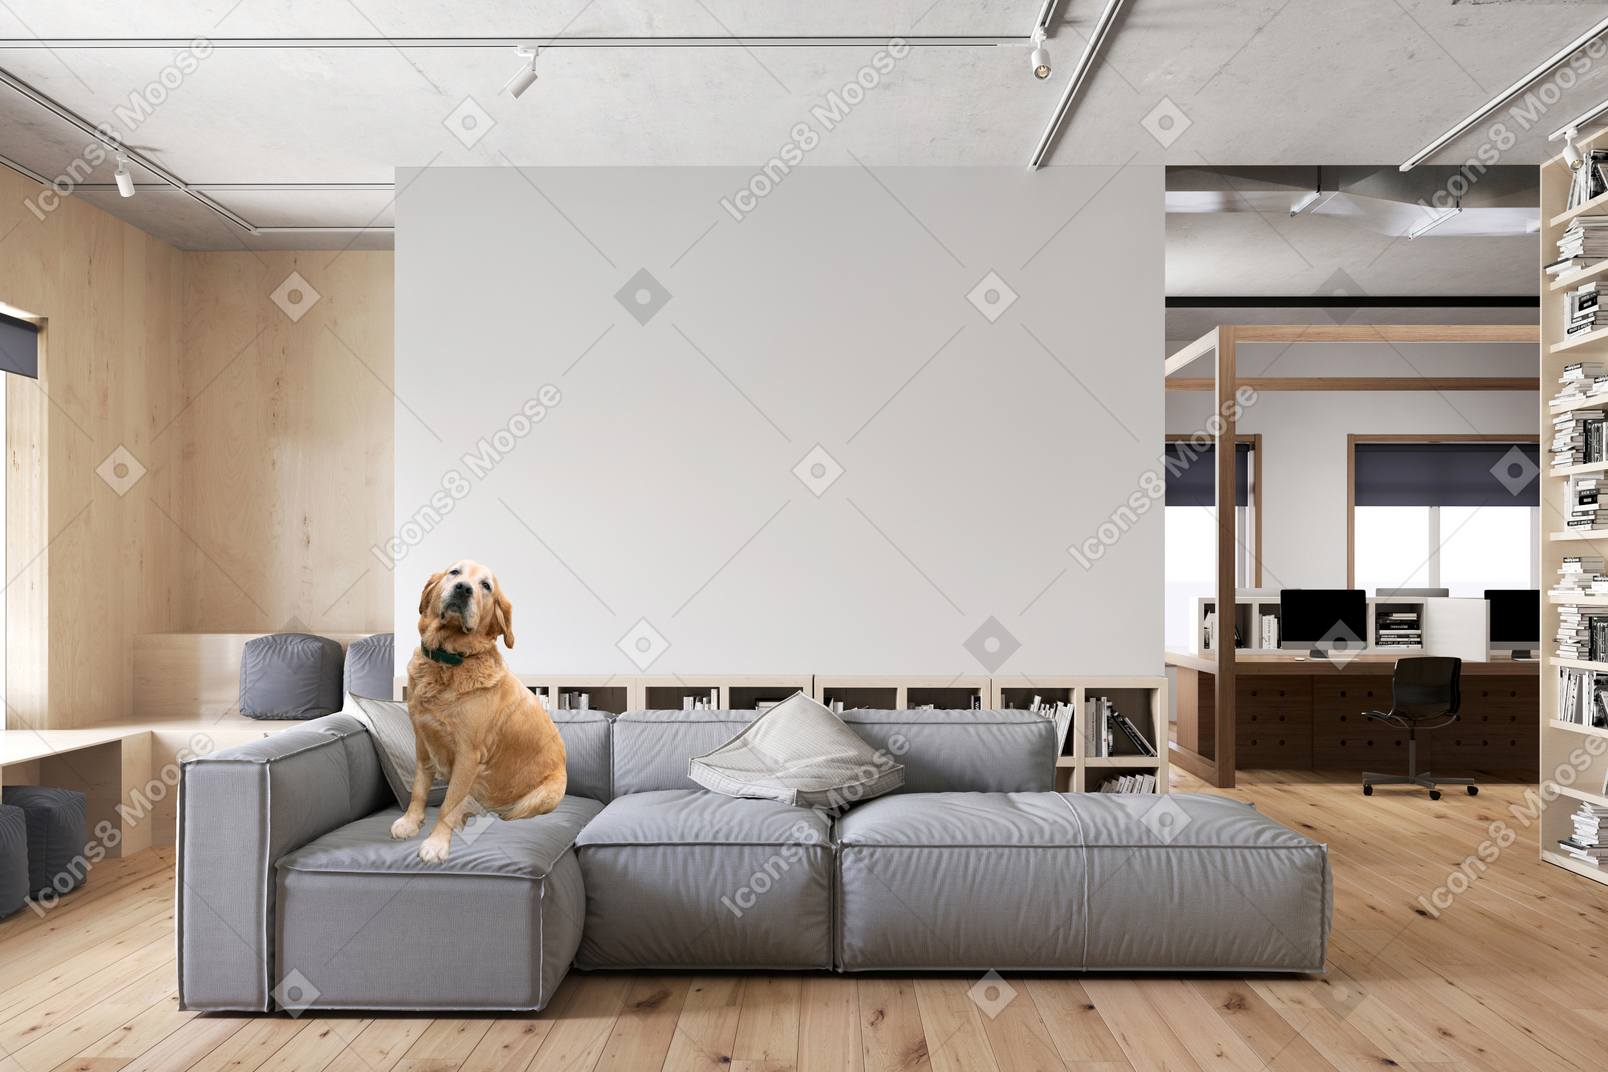 A dog sitting on a couch in a living room